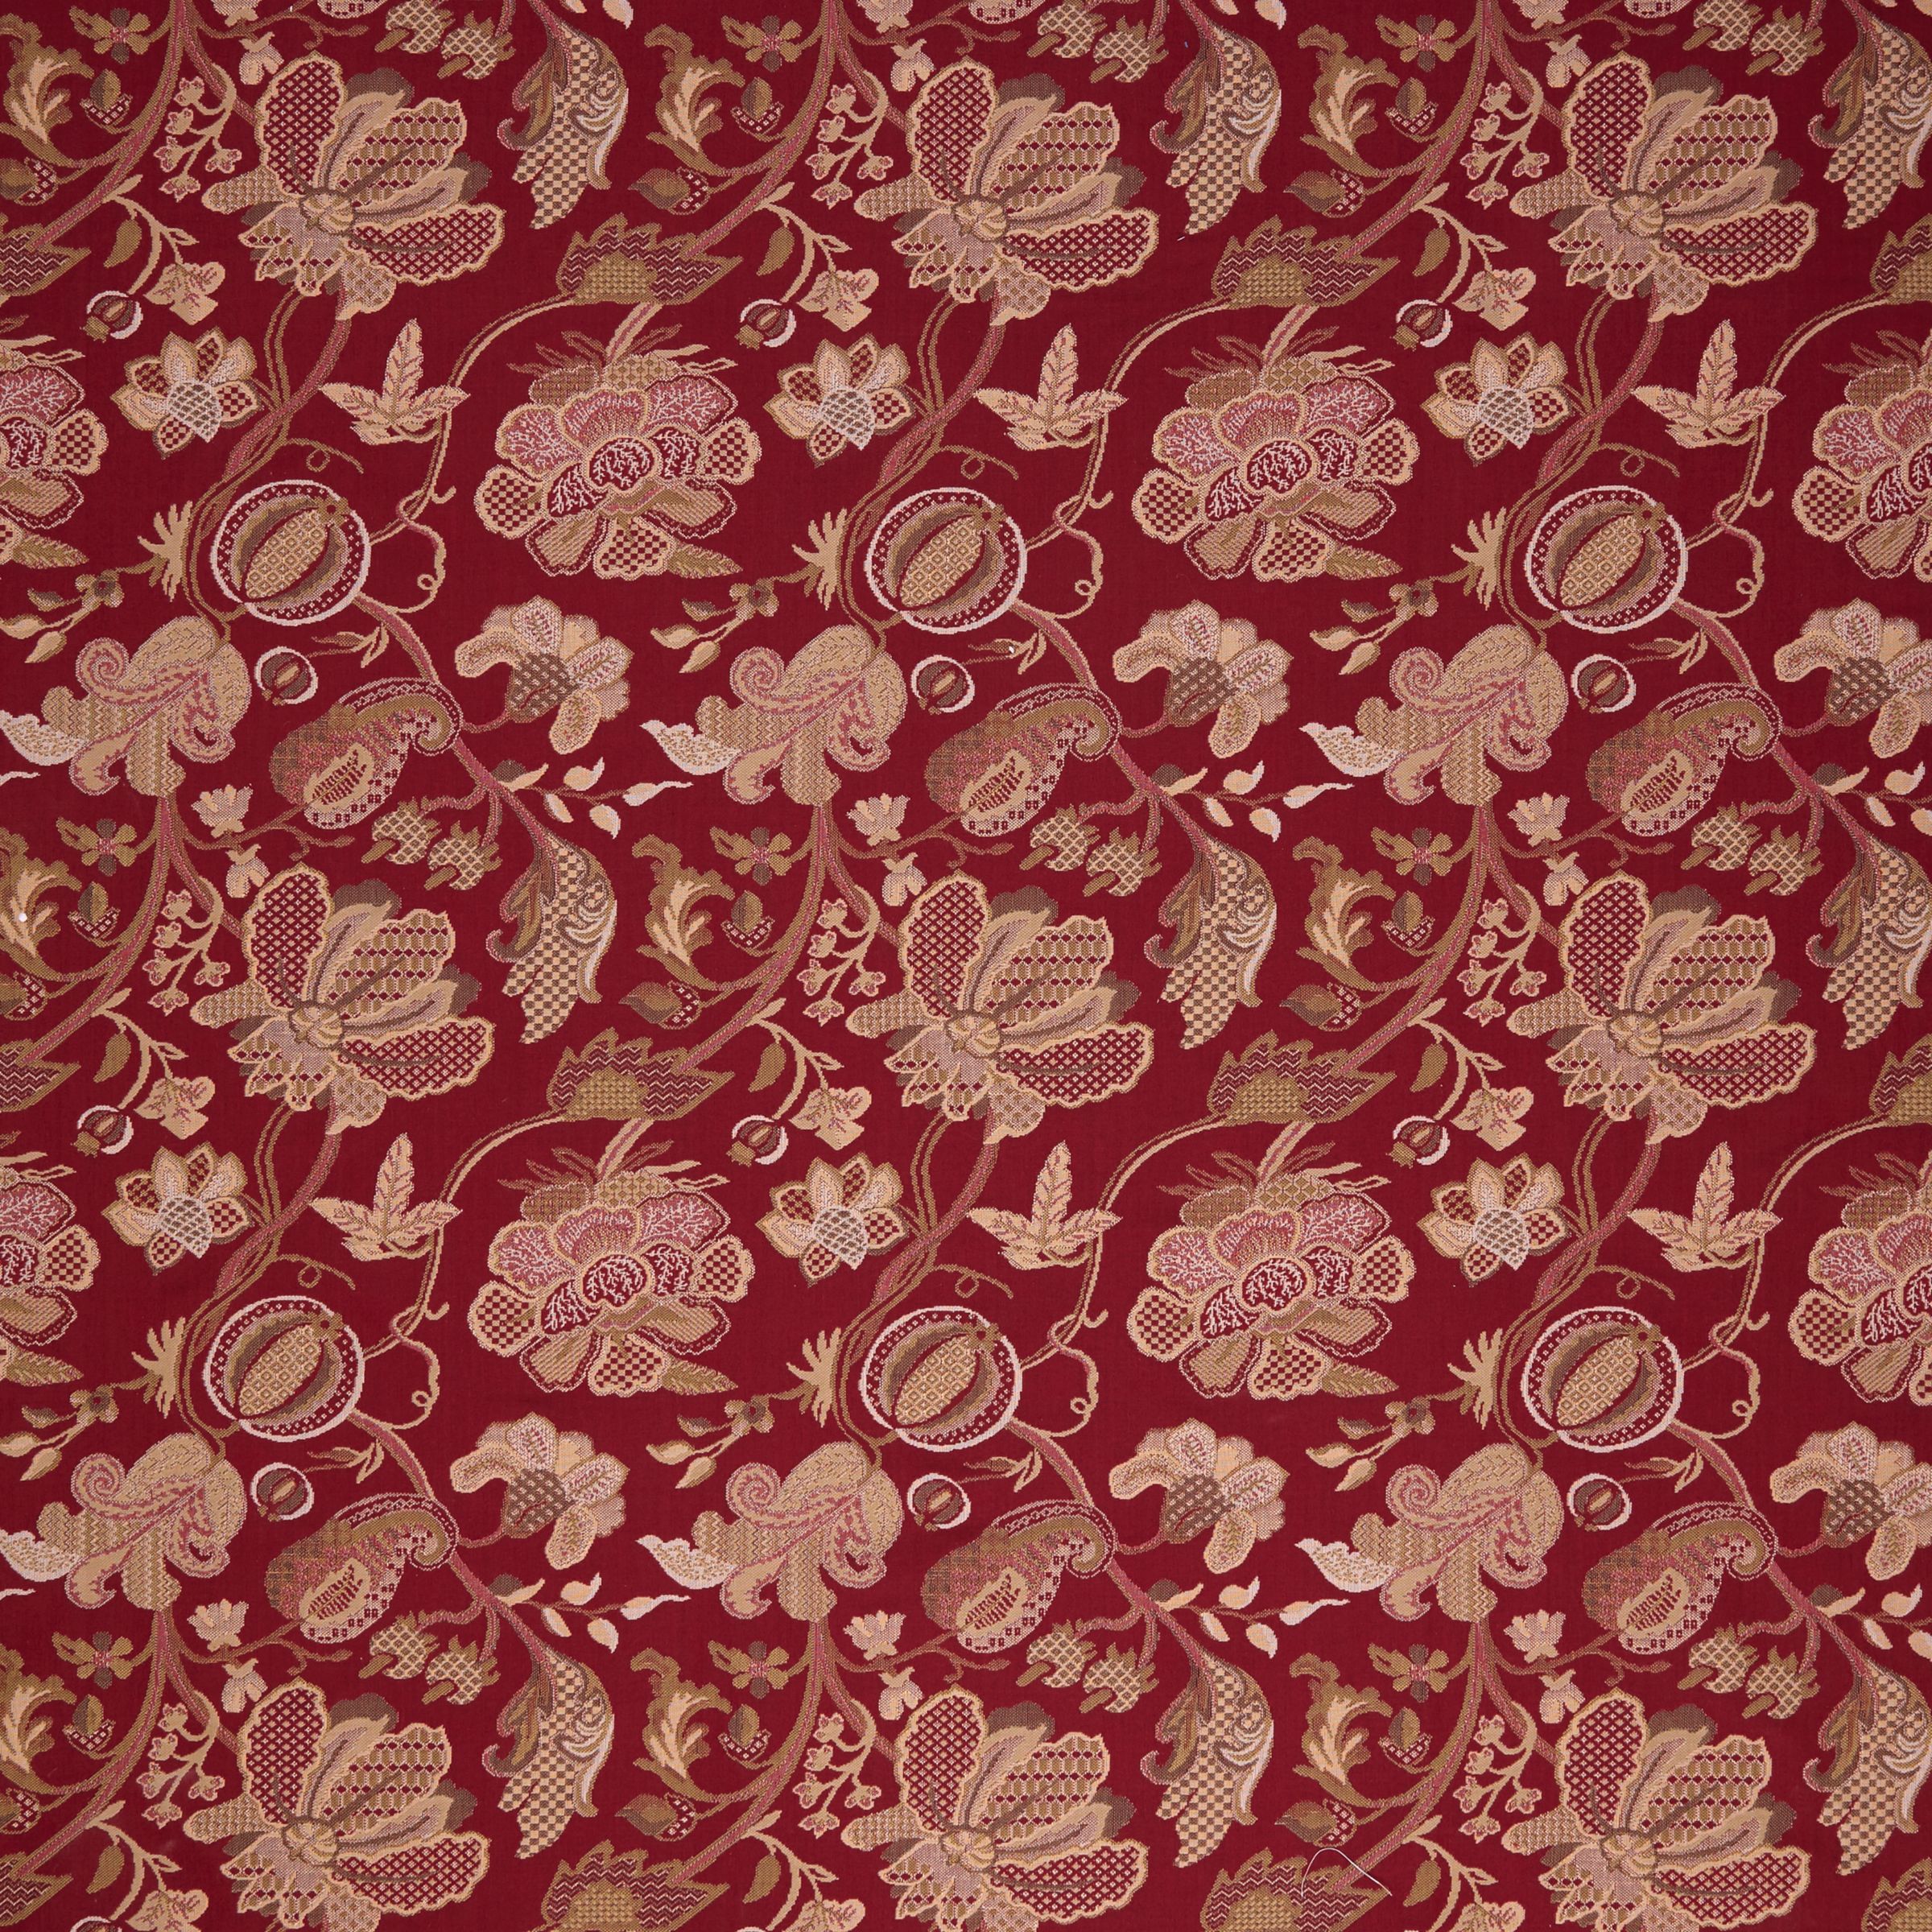 John Lewis & Partners Fotheringay Fabric, Red